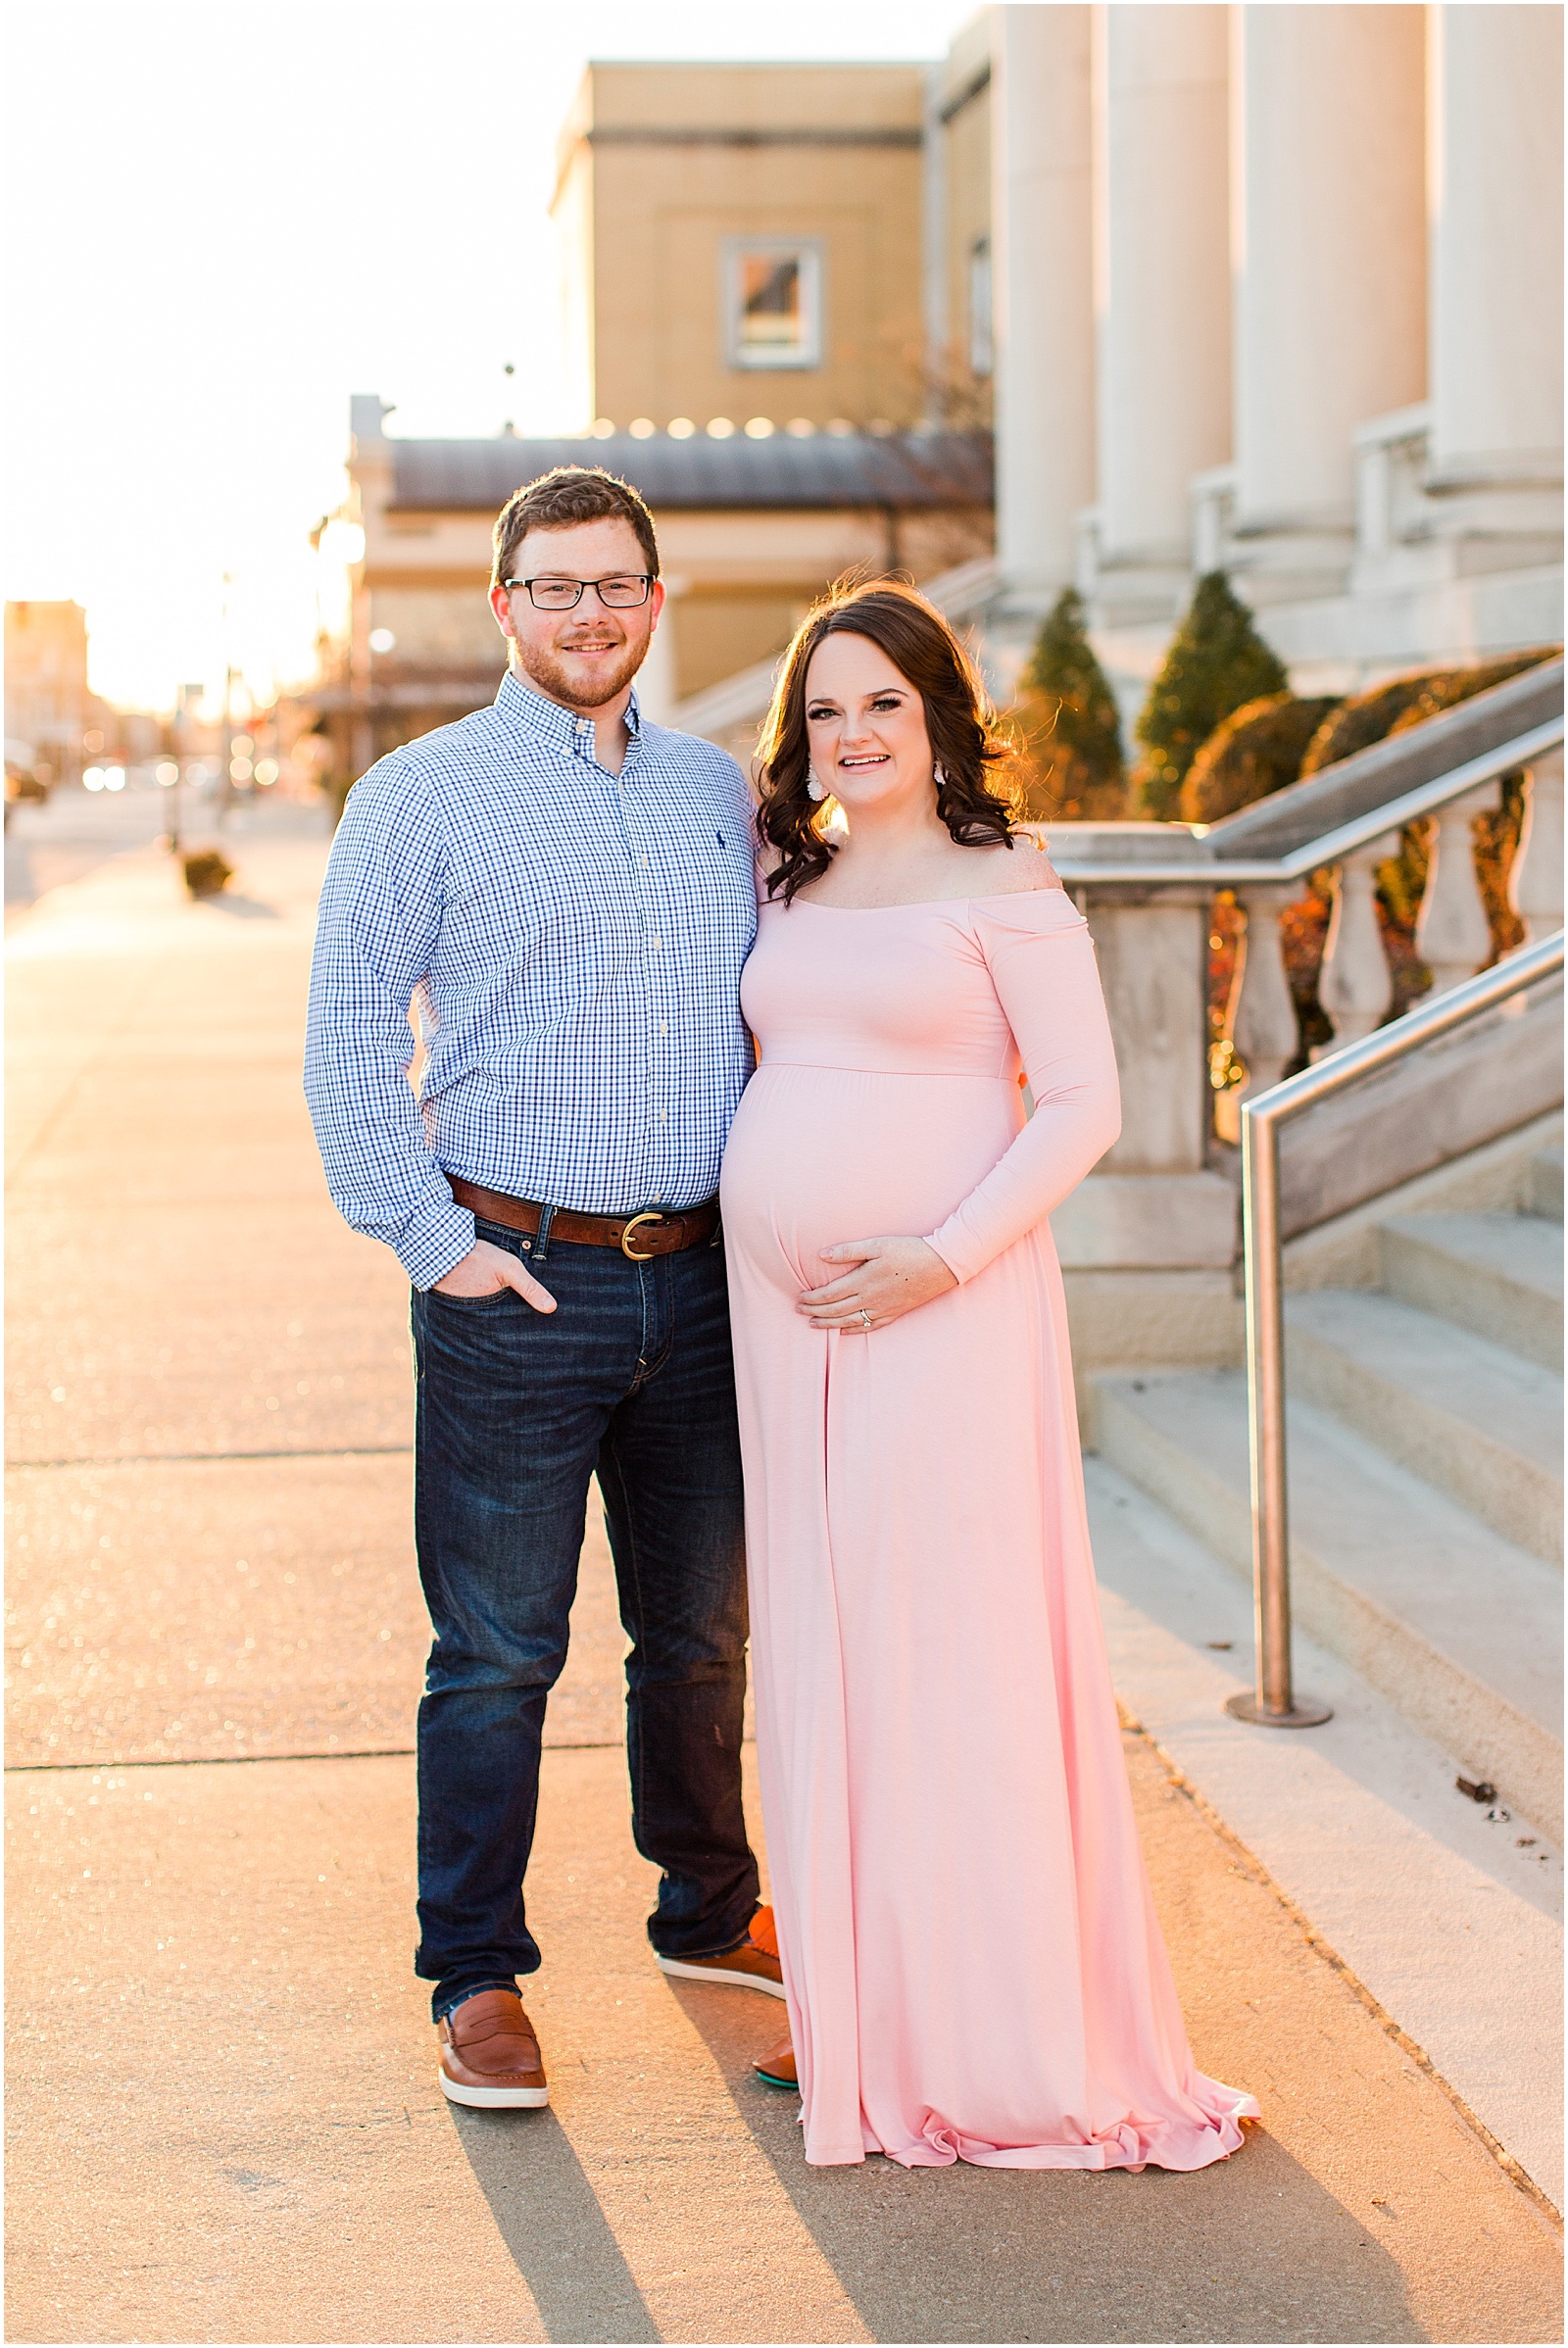 A Downtown Owensboro Maternity Session | Kayla and Grant Evansville Indiana Wedding Photographers-0001.jpg